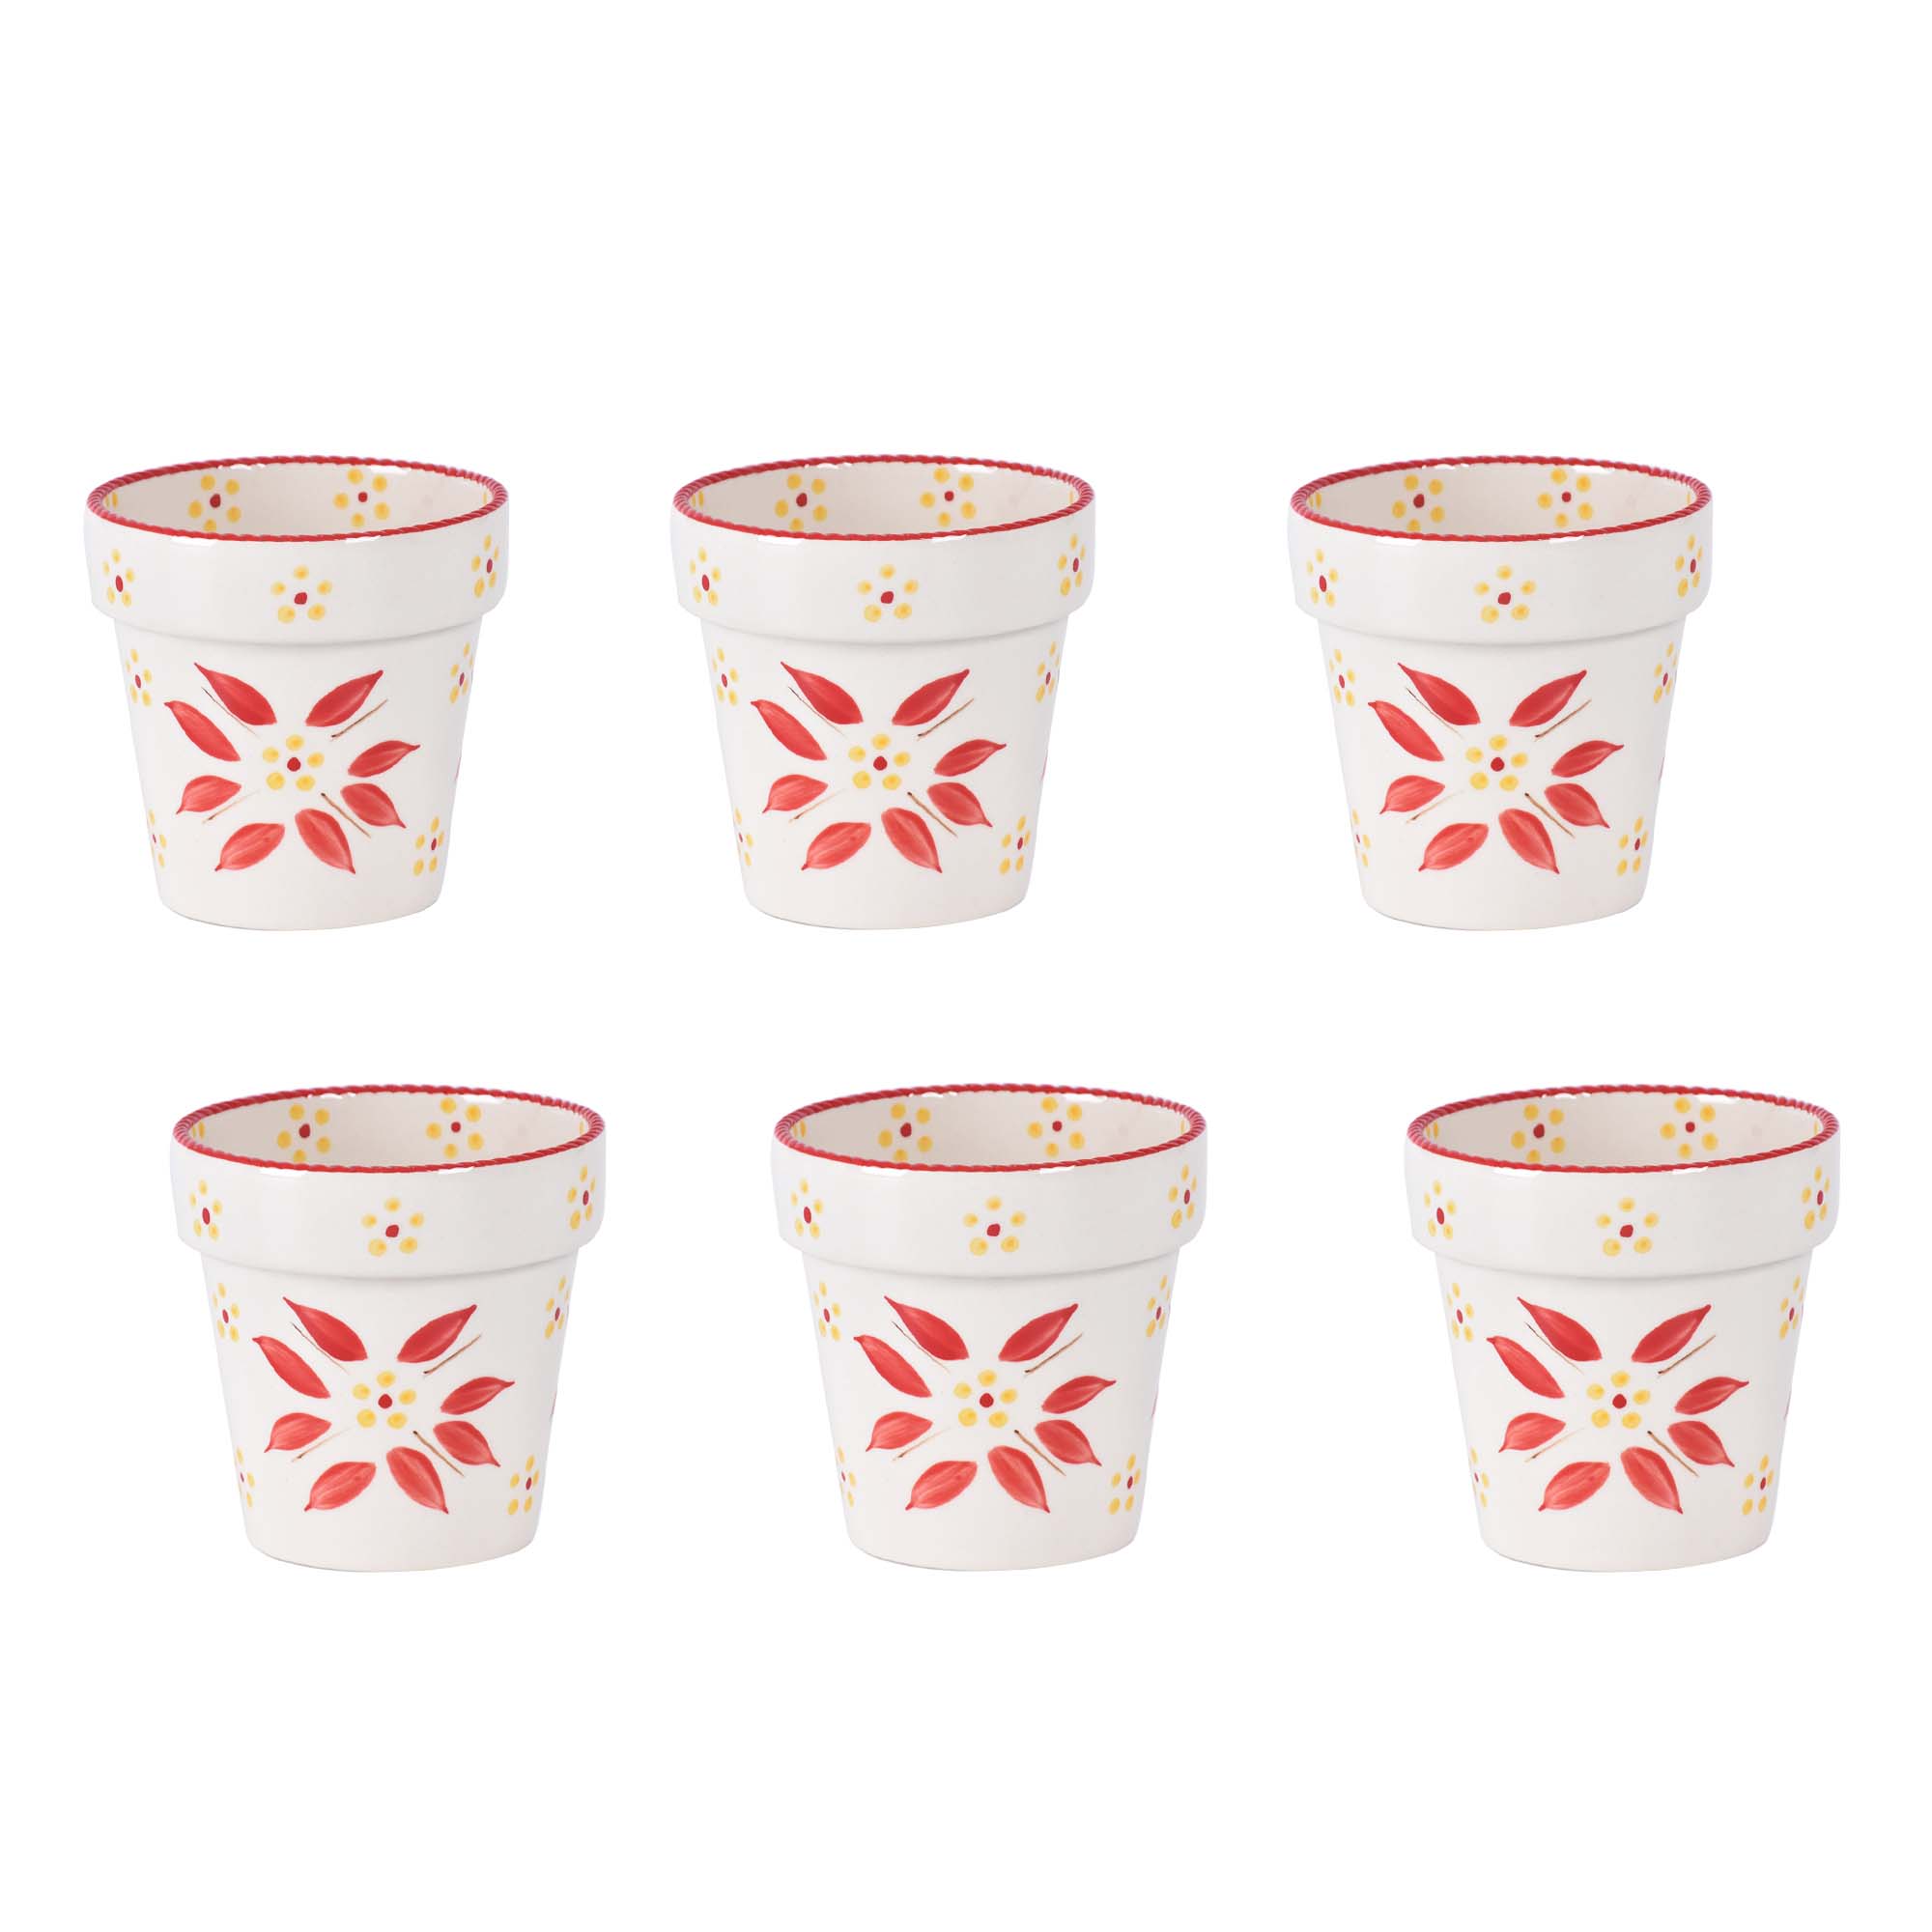 temp-tations® Old World Centertaining Cups – 6 Piece – Red